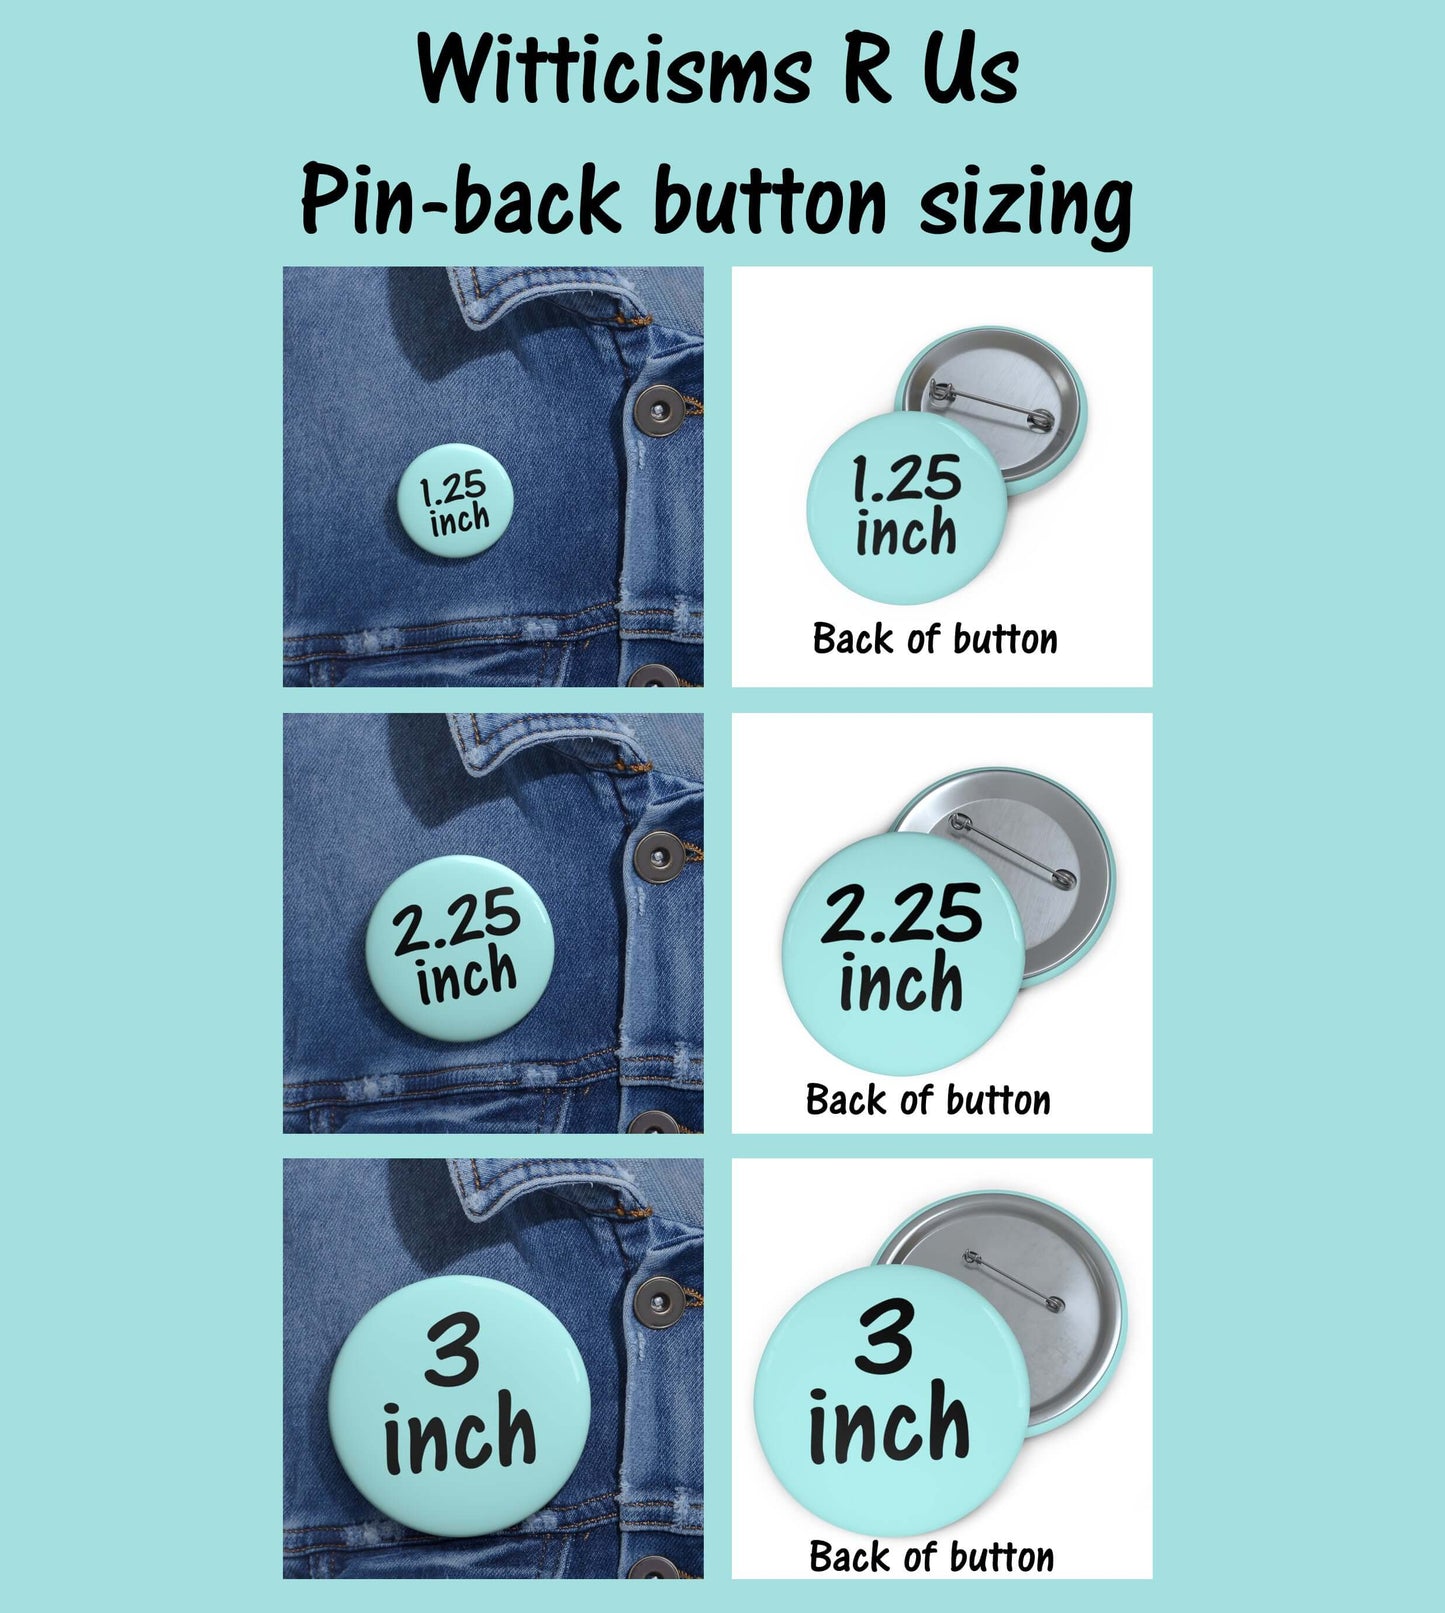 witticisms r us pinback button infographic